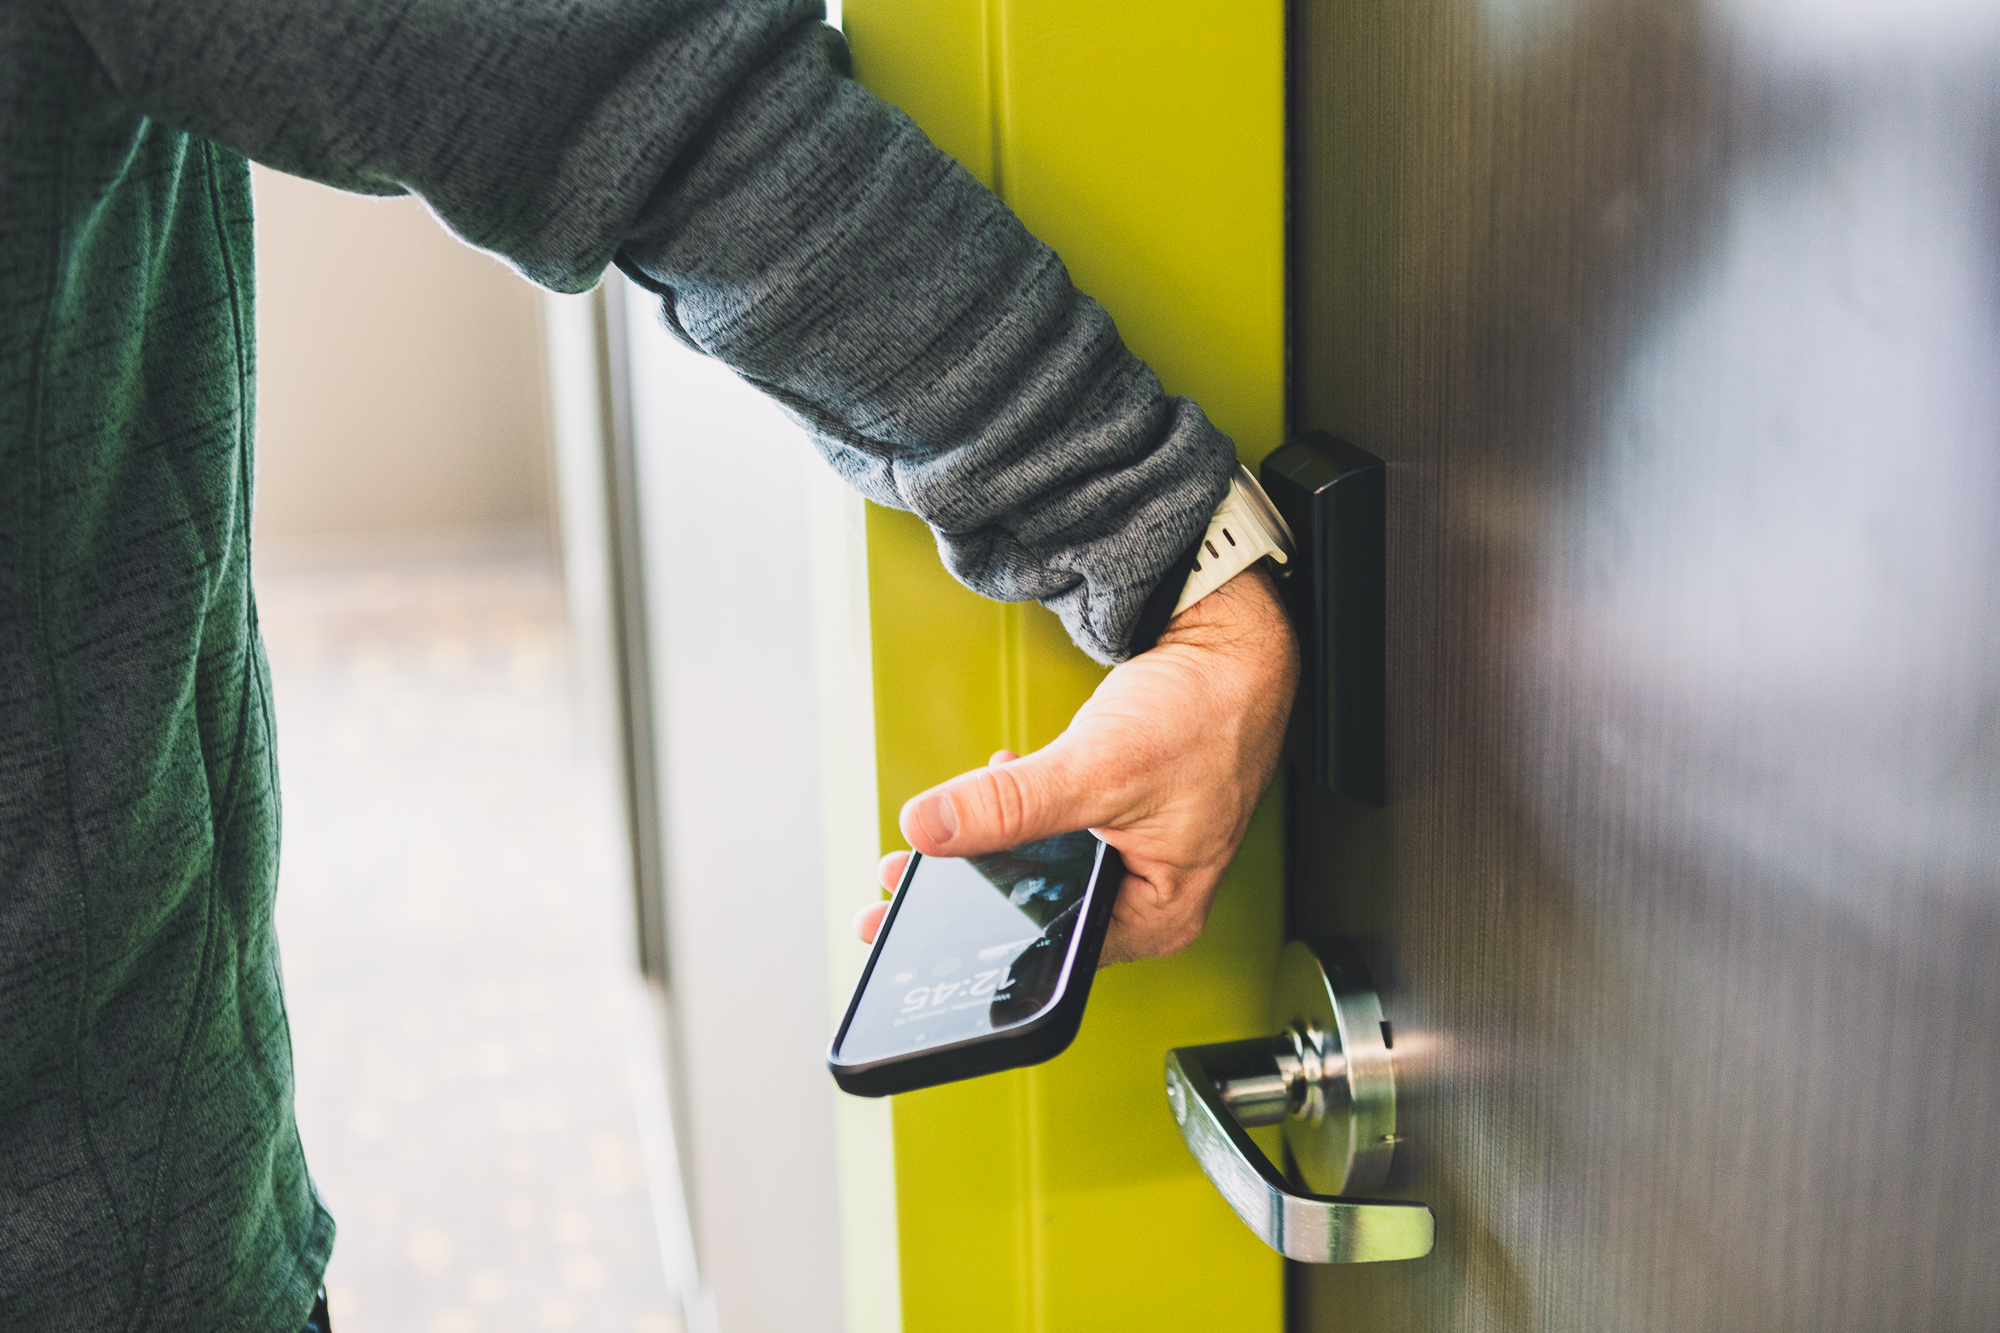 The New Hall is the first building on campus to feature electronic key entry. A man demonstrates how he uses his Apple Watch to unlock a door by placing it against a pad above the door handle.